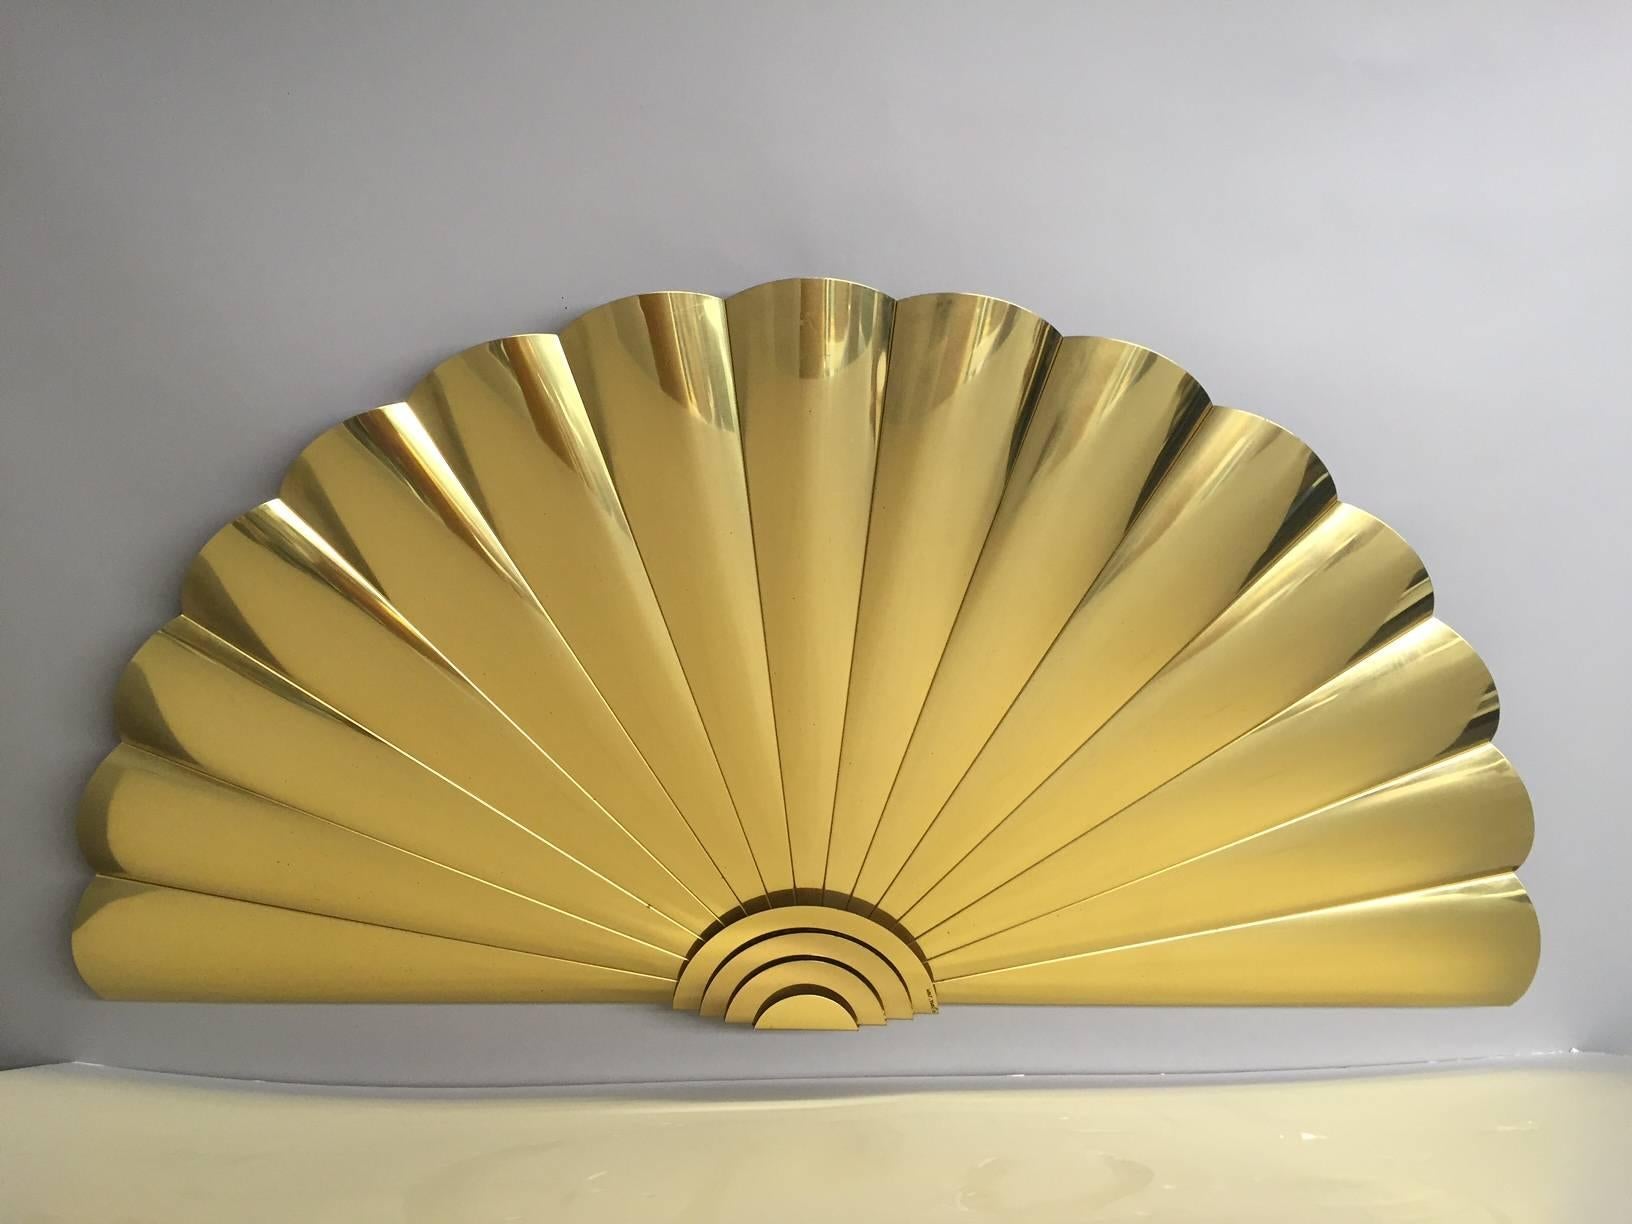 Large sculptural brass sunburst wall sculpture with undulating fan like ripples, signed and dated by world renown artist Curtis Jere. Two semi circular pieces can be hung separately or together to form a perfect circle with two raised concentric